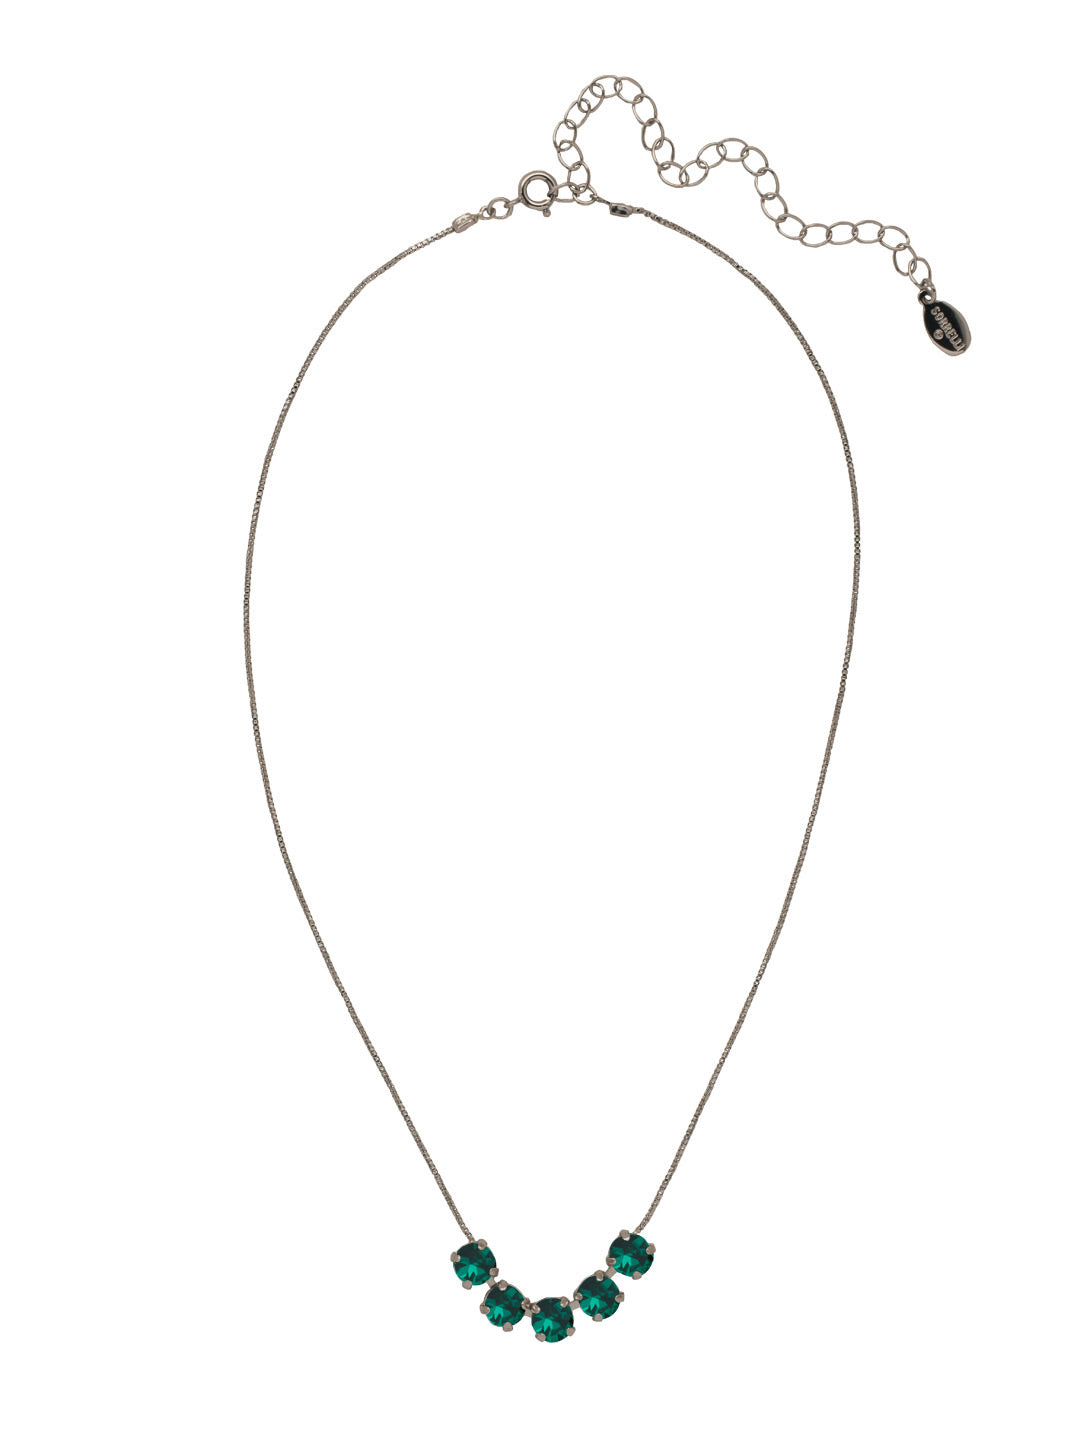 Shaughna Tennis Necklace - NFC84ASEME - <p>The Shaughna Tennis Necklace features five crystals on a delicate adjustable chain. From Sorrelli's Emerald collection in our Antique Silver-tone finish.</p>